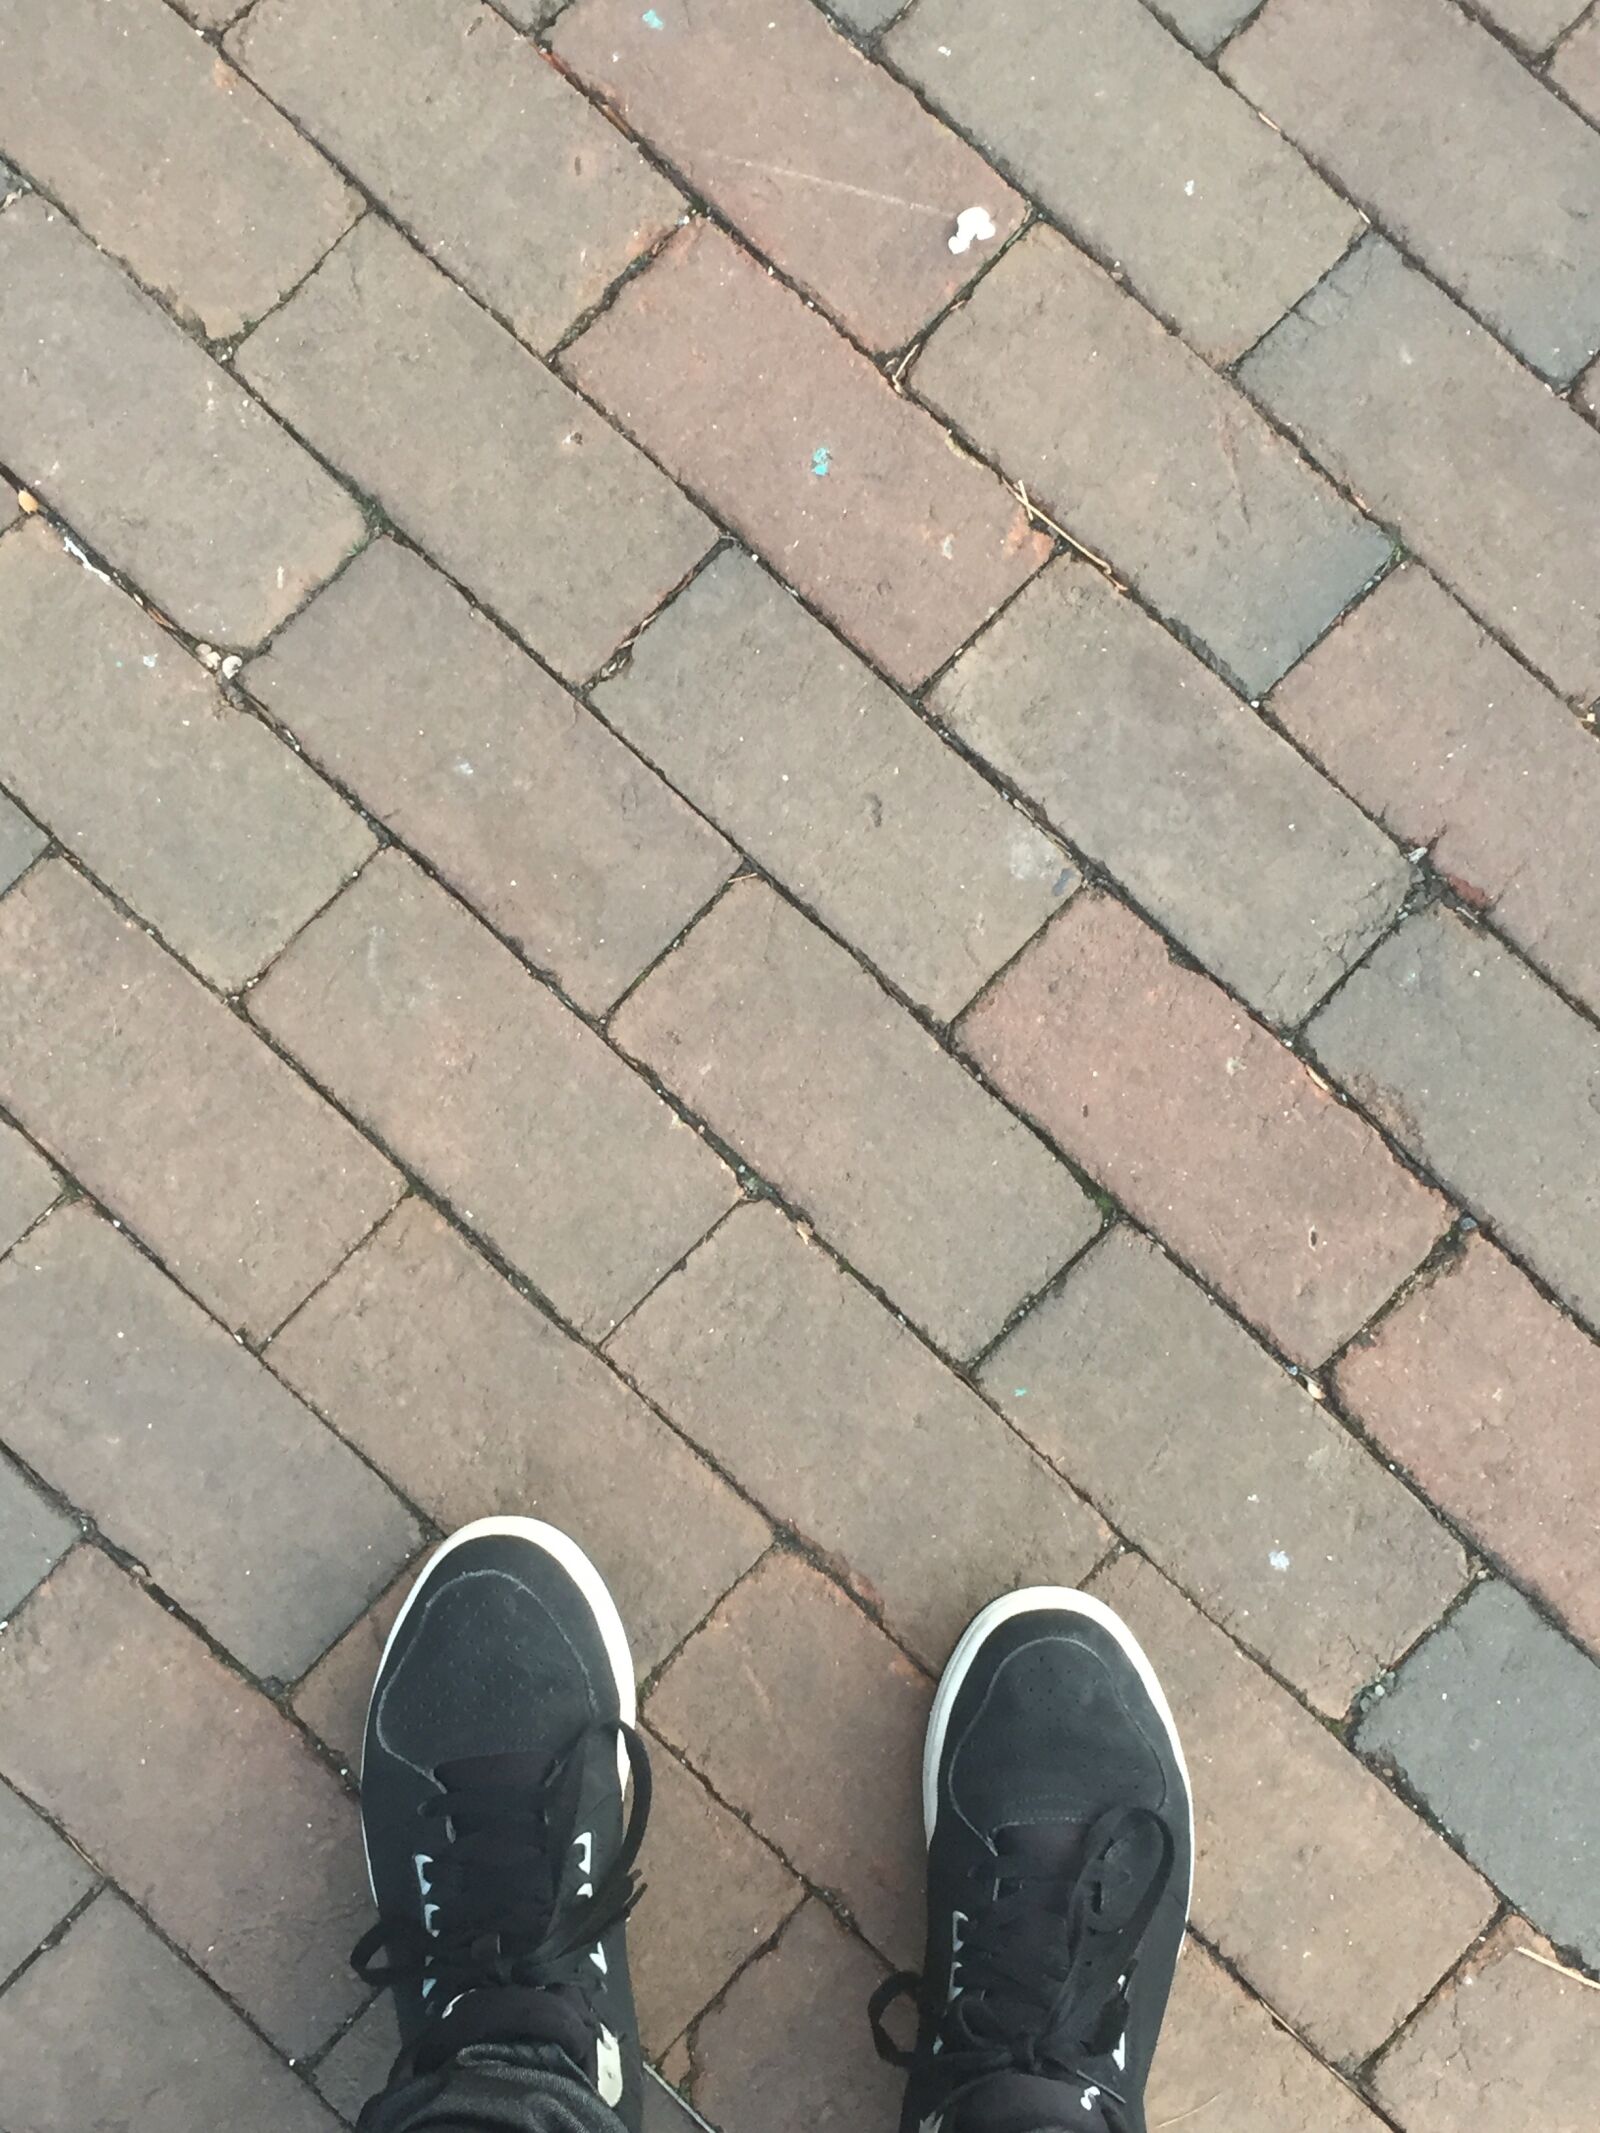 Apple iPhone 6 sample photo. Brick, feet, shoes, sneakers photography